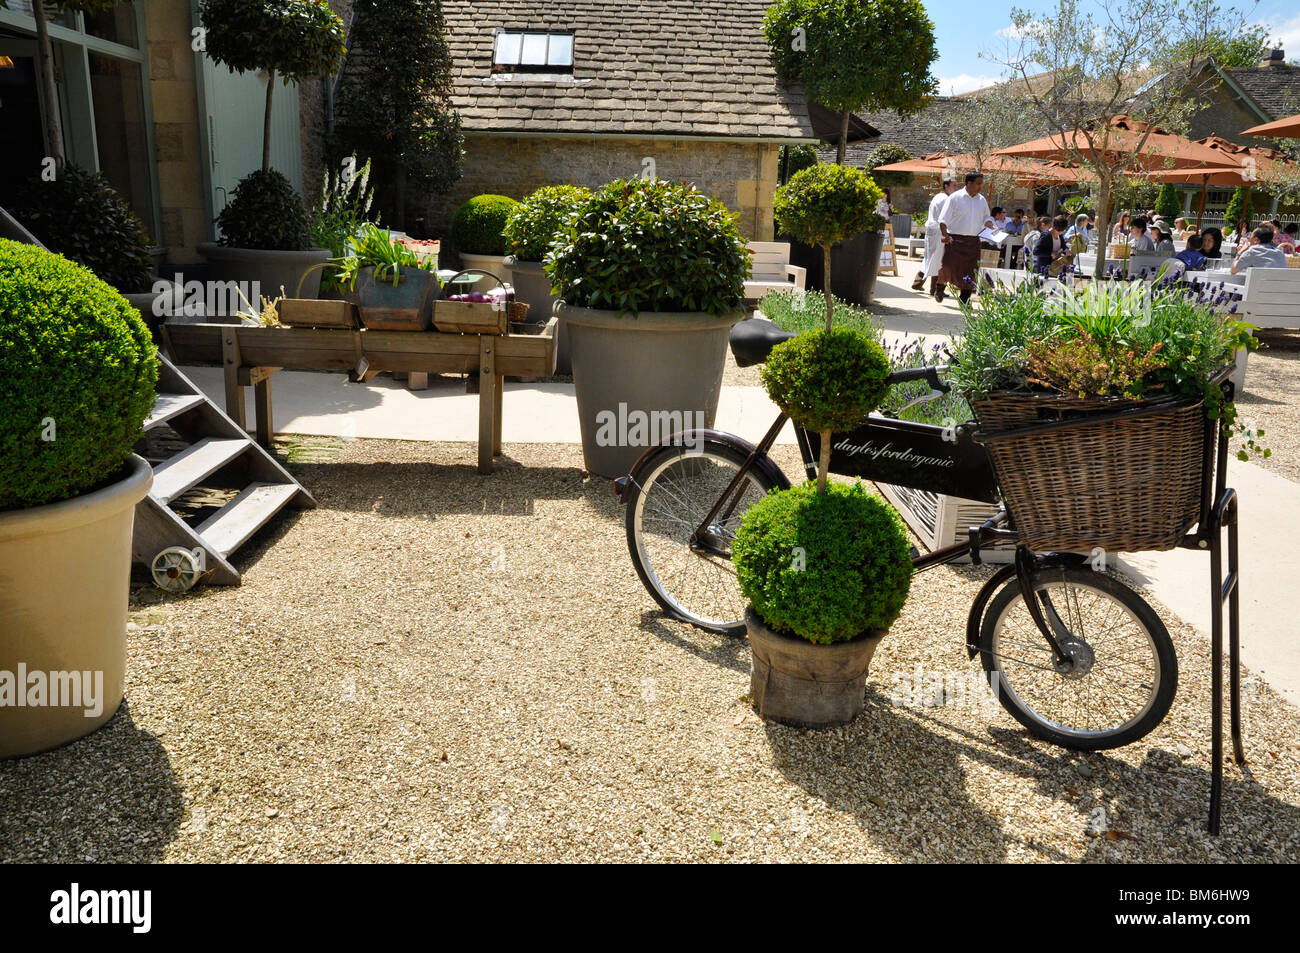 Daylesford Farm Shop with outdoor cafe on a sunny day - Cotswolds, Gloucestershire, UK Stock Photo